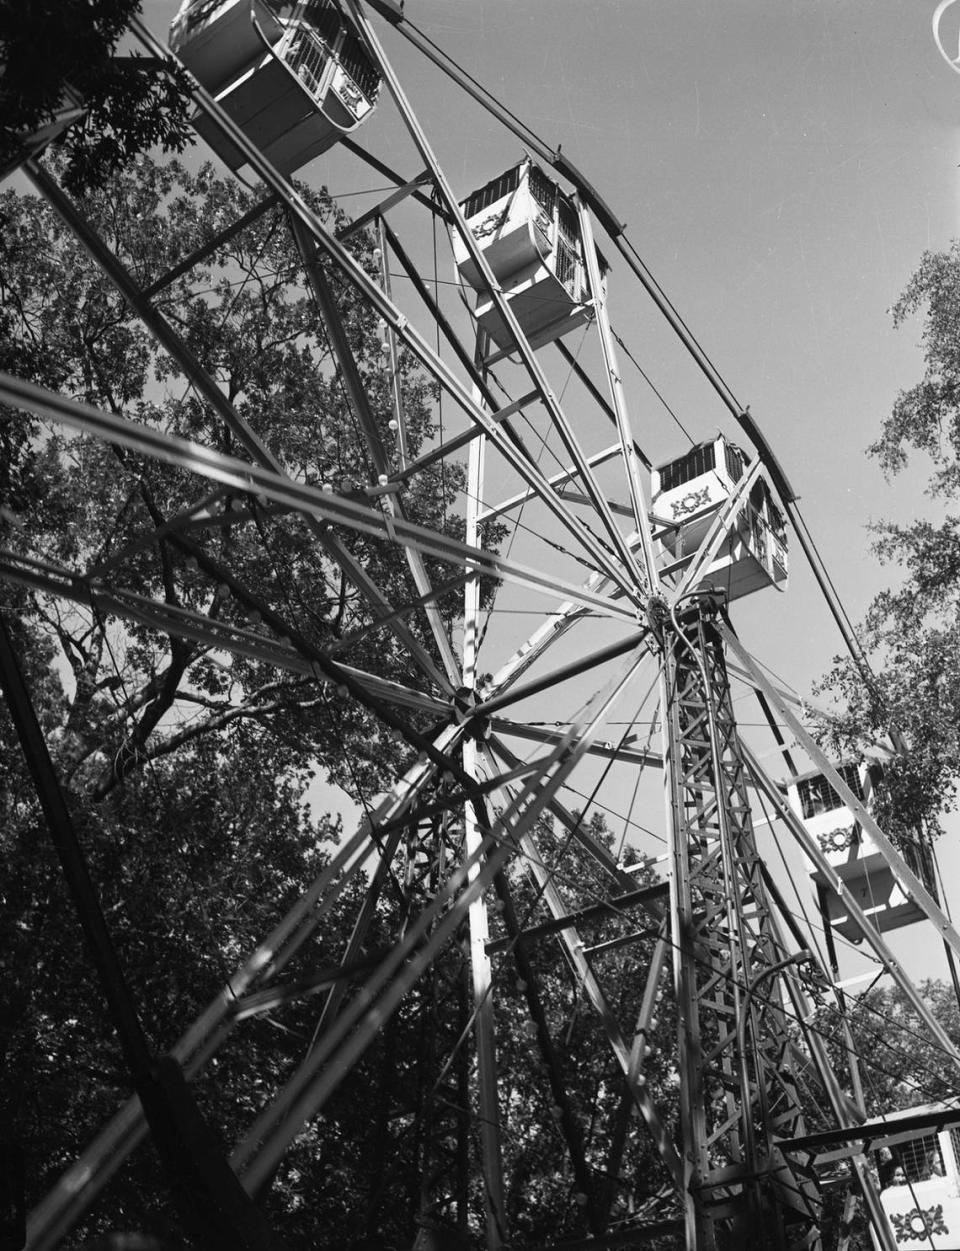 August 1941: “With the summer season nearing an end, the Forest Park Zoo remains one of the most popular destinations in Fort Worth. In the carnival section of the park, children are riding the Ferris Wheel as they get an overhead view of the zoo.”